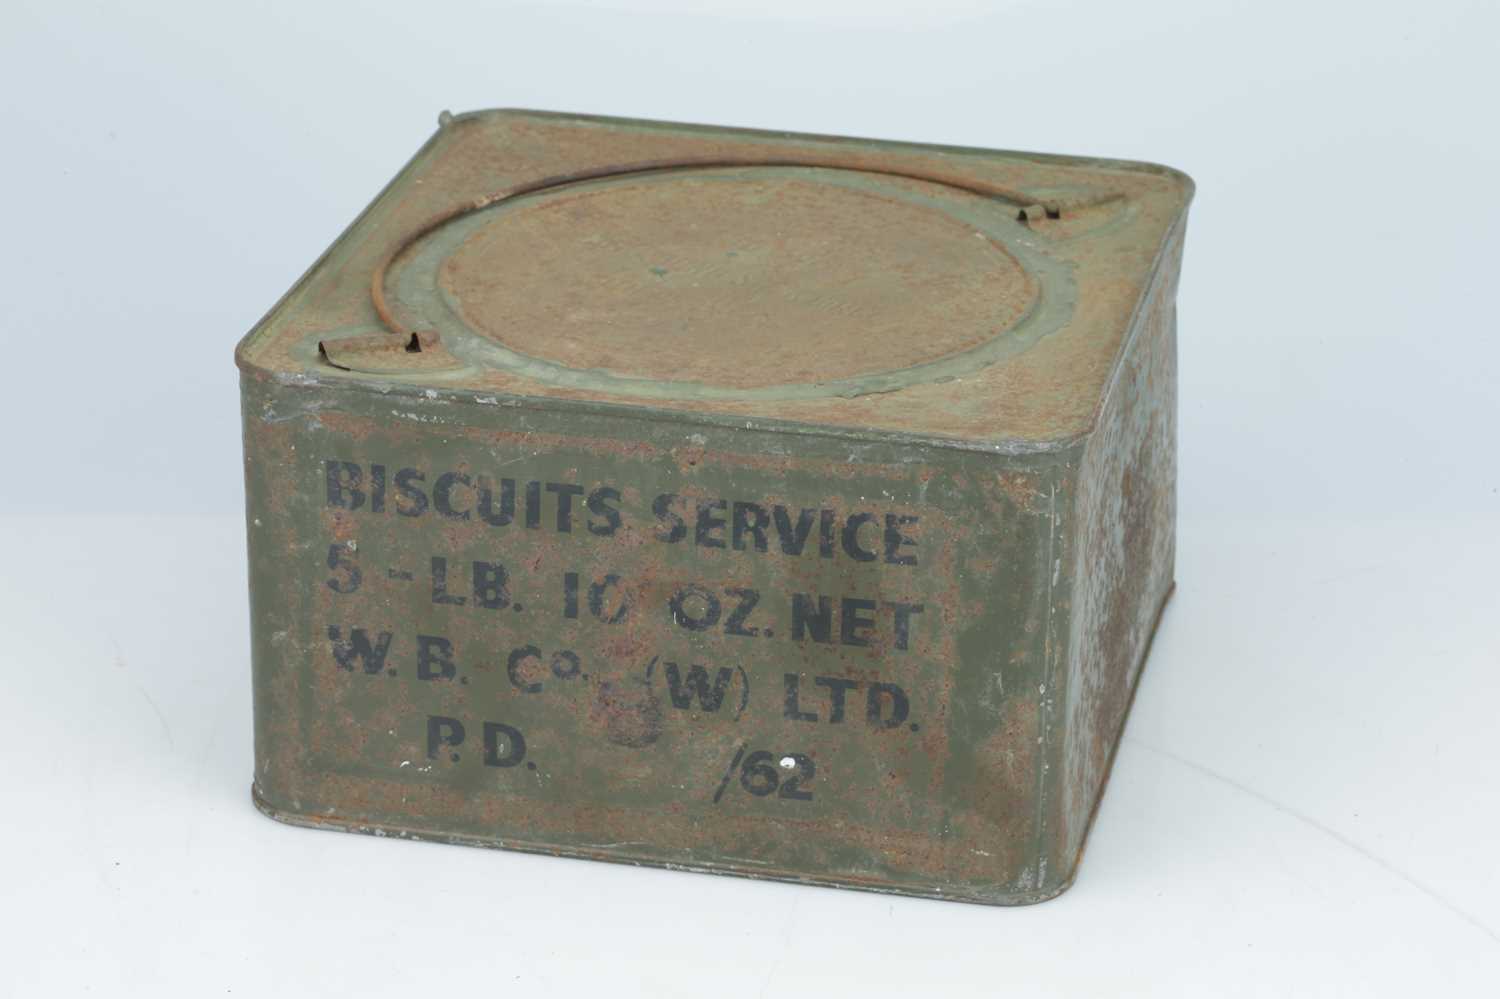 Lot 445 - A W. B. Co. Biscuits: Service Sealed Biscuit Tin